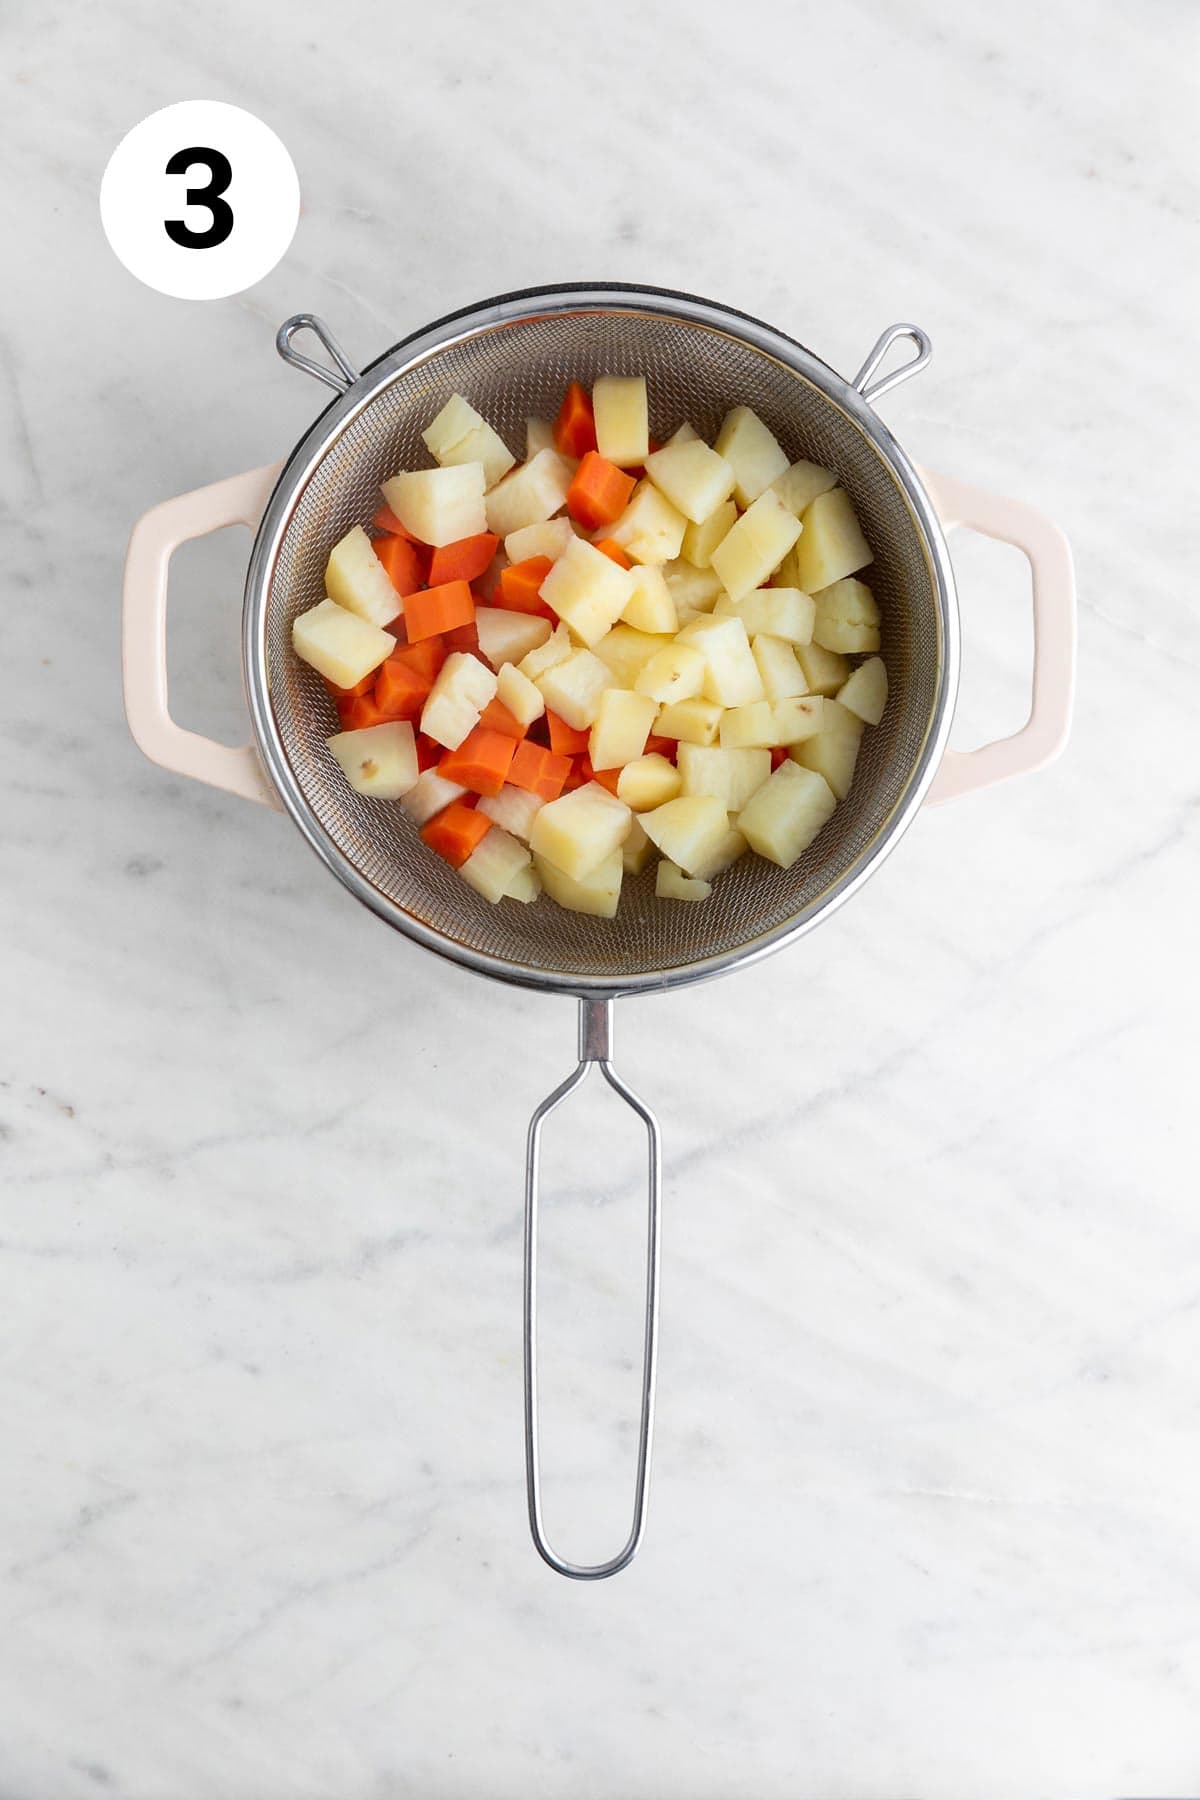 Boiled potatoes and carrots draining in a colander over a pot.